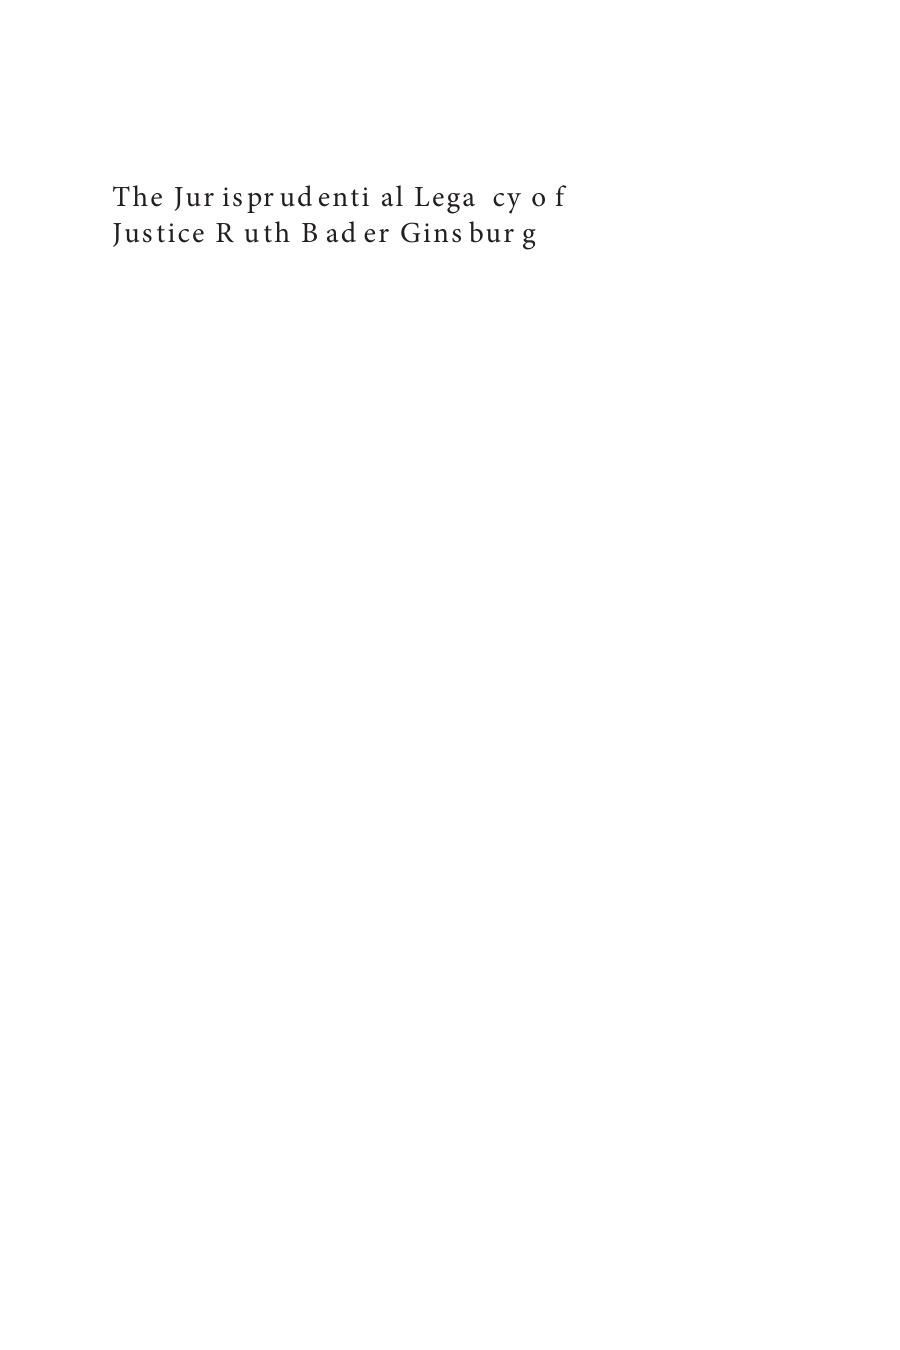 The Jurisprudential Legacy of Justice Ruth Bader Ginsburg by Ryan Vacca (editor); Ann Bartow (editor)